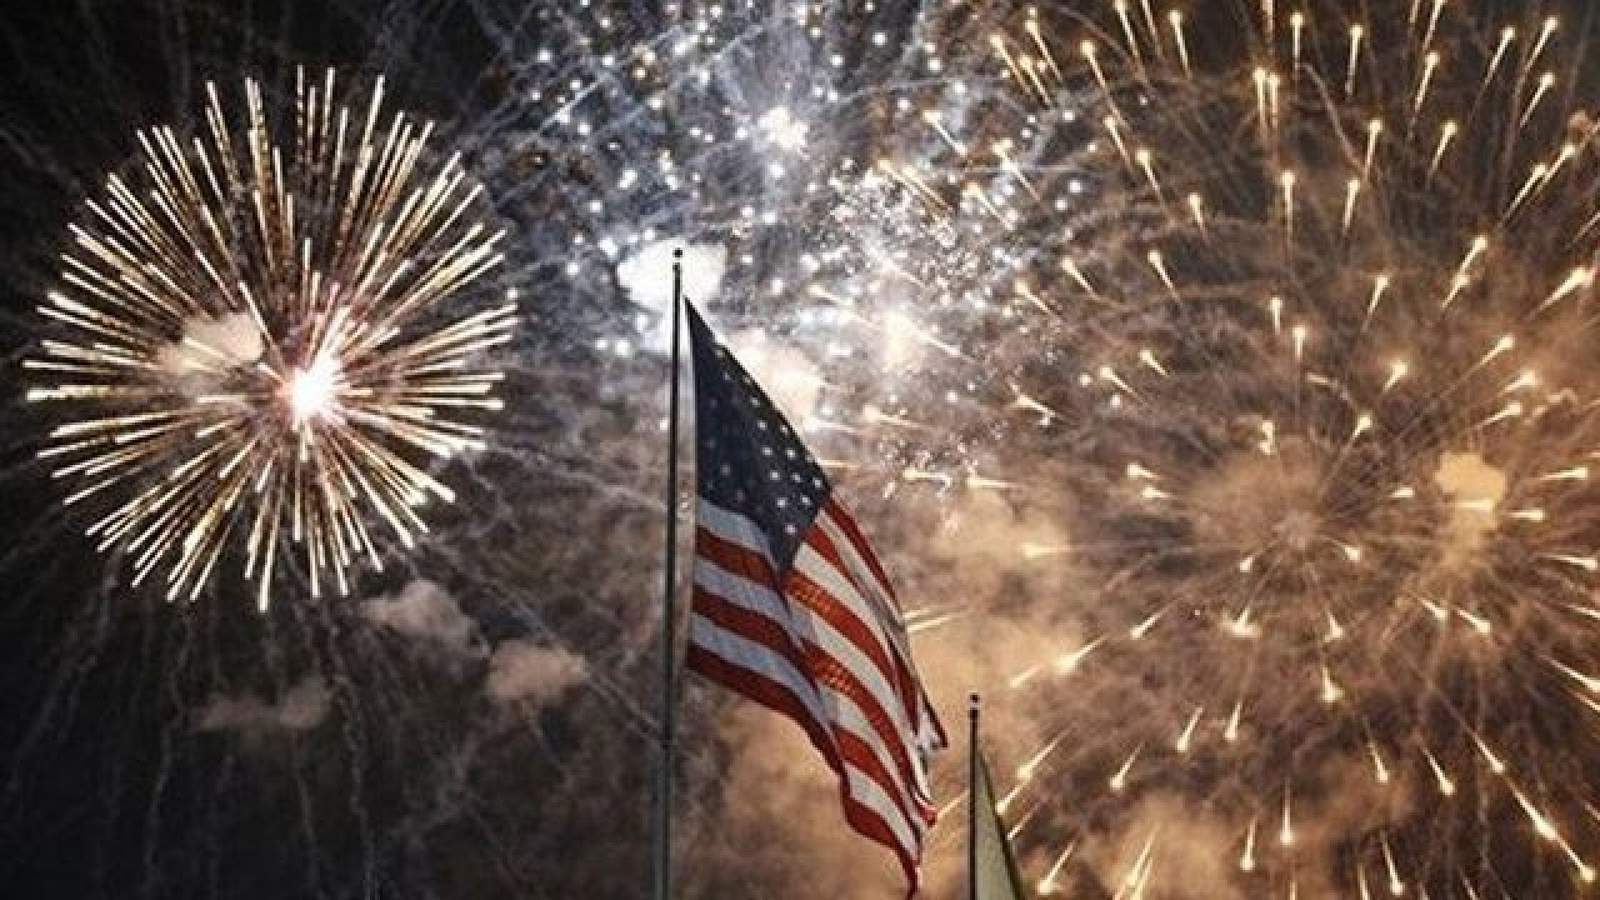 17 places to watch fireworks in Southwest, Central Virginia this 4th of July weekend